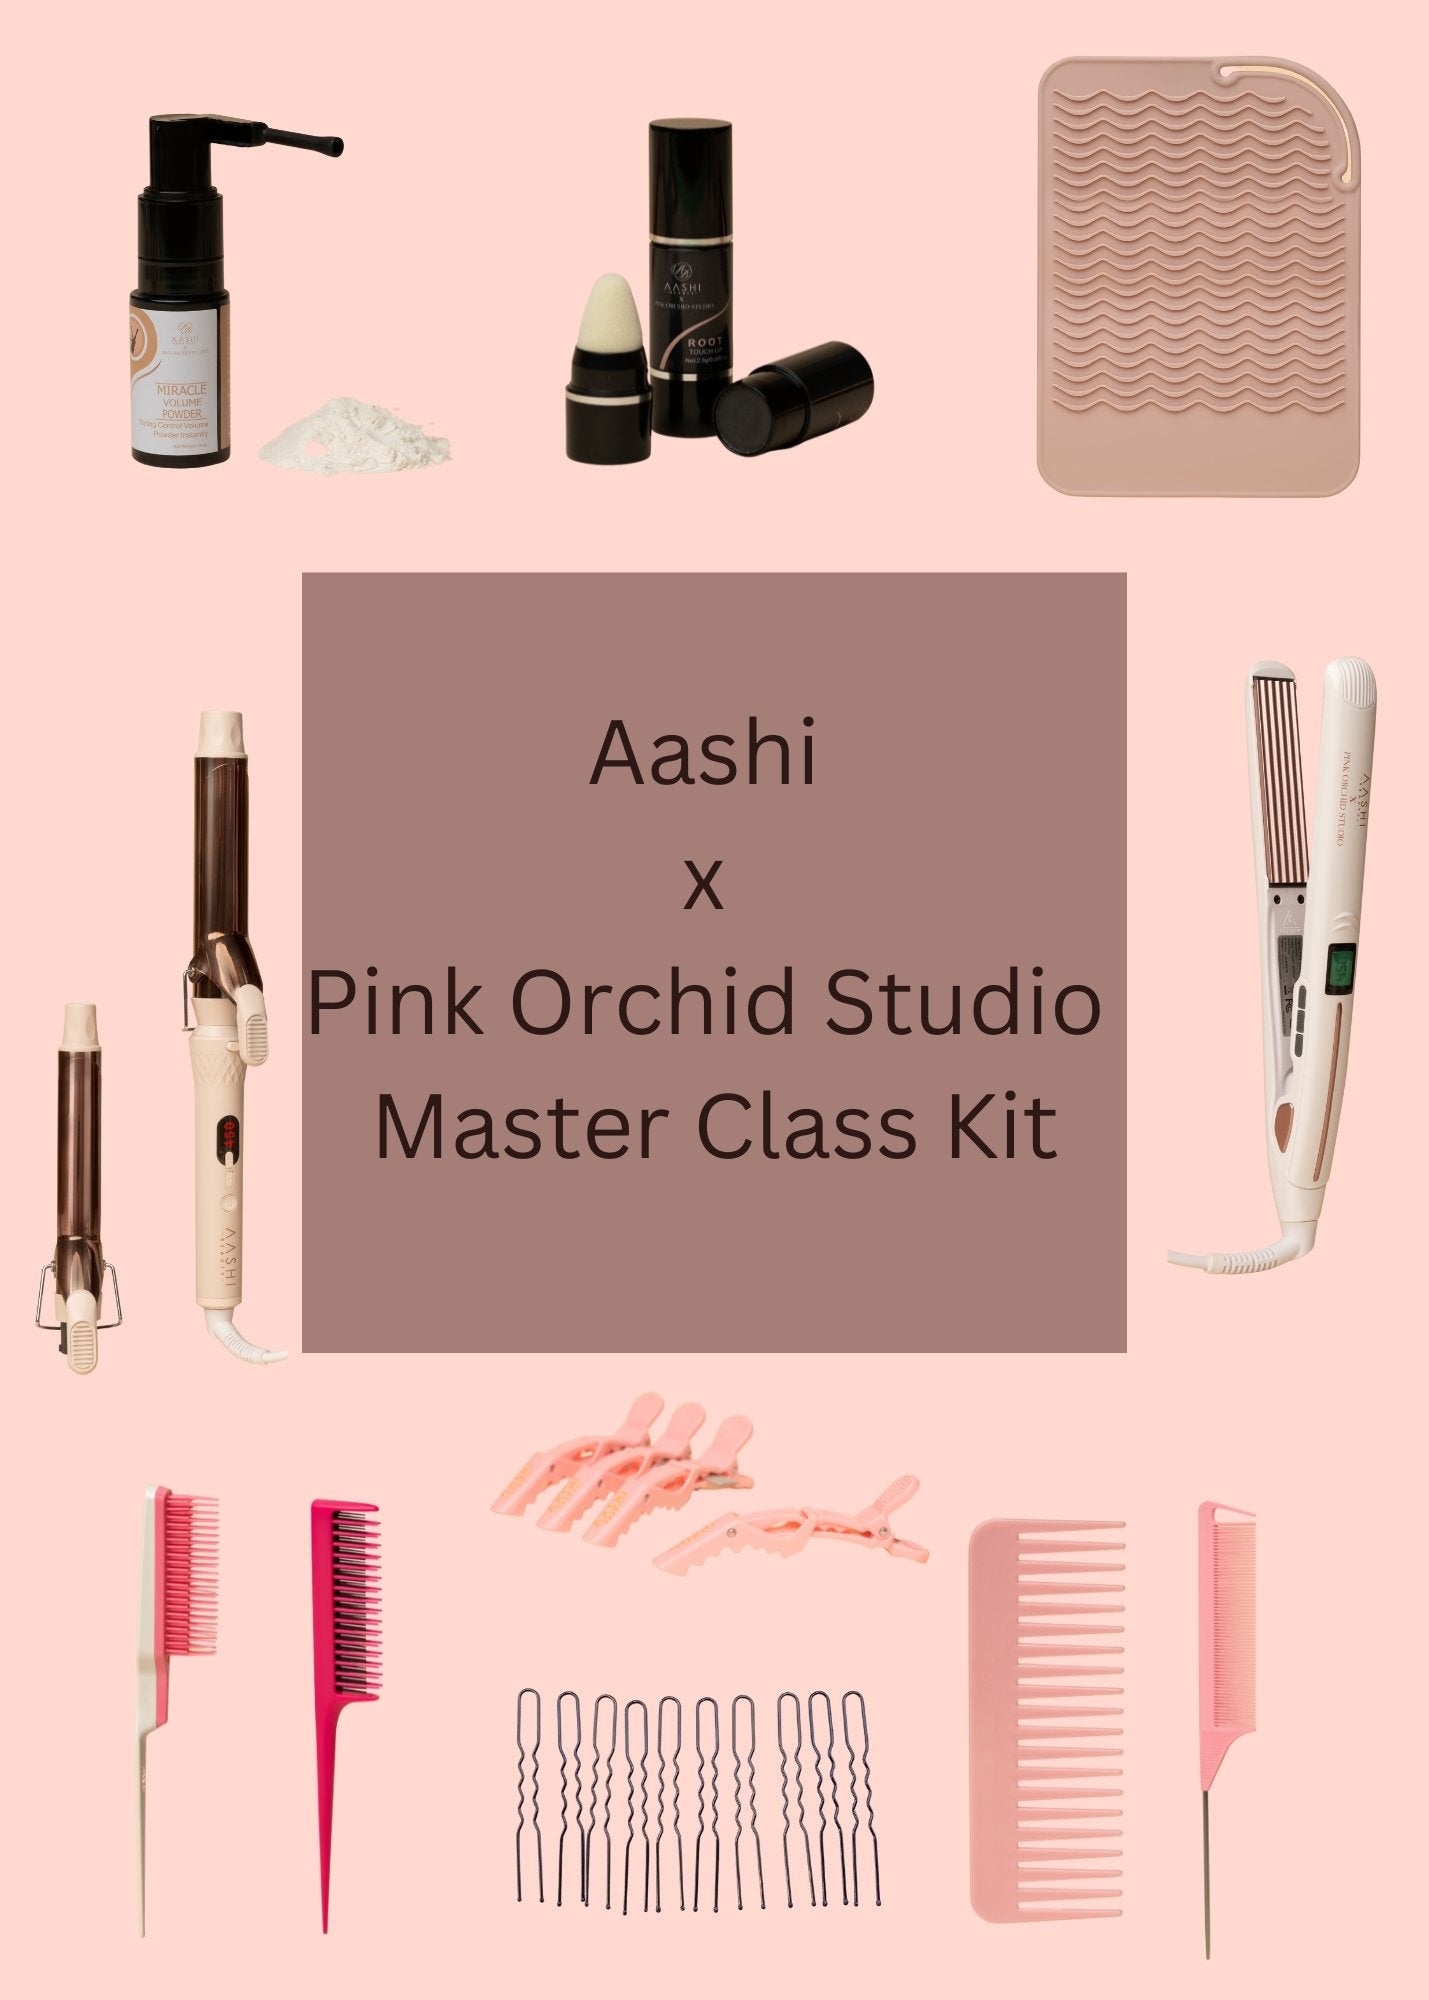 Aashi x Pink Orchid Studio Master Class Kit (With Clamp Curler) - Aashi Beauty